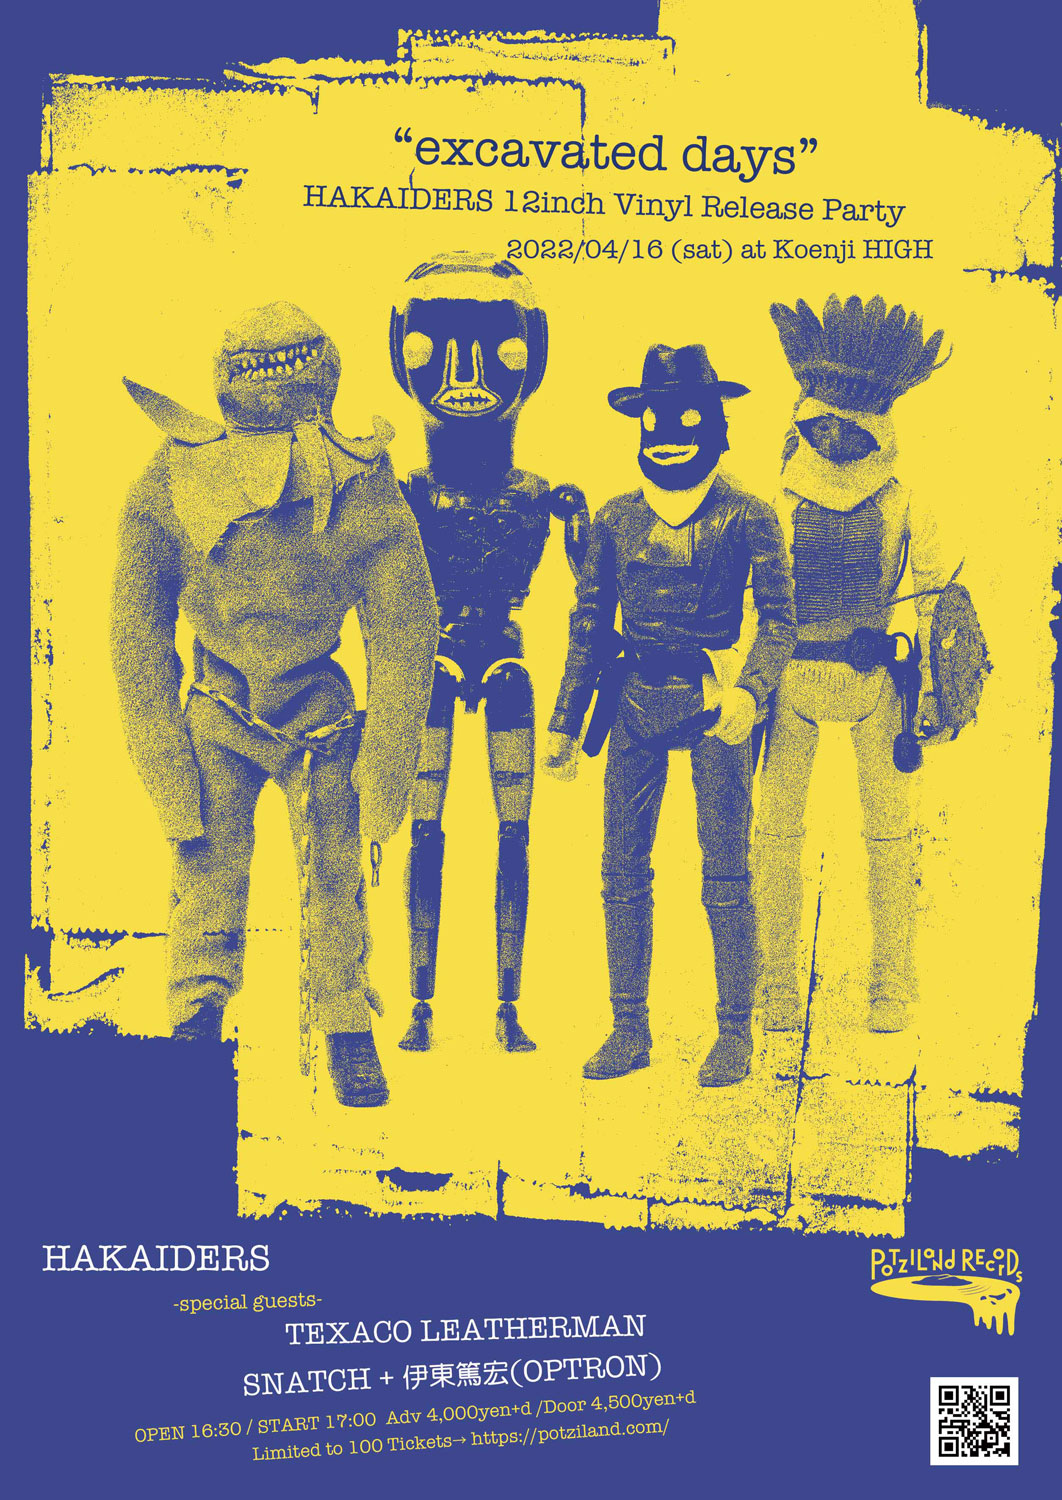 "excavated days" HAKAIDERS 12inch Vinyl Release Party